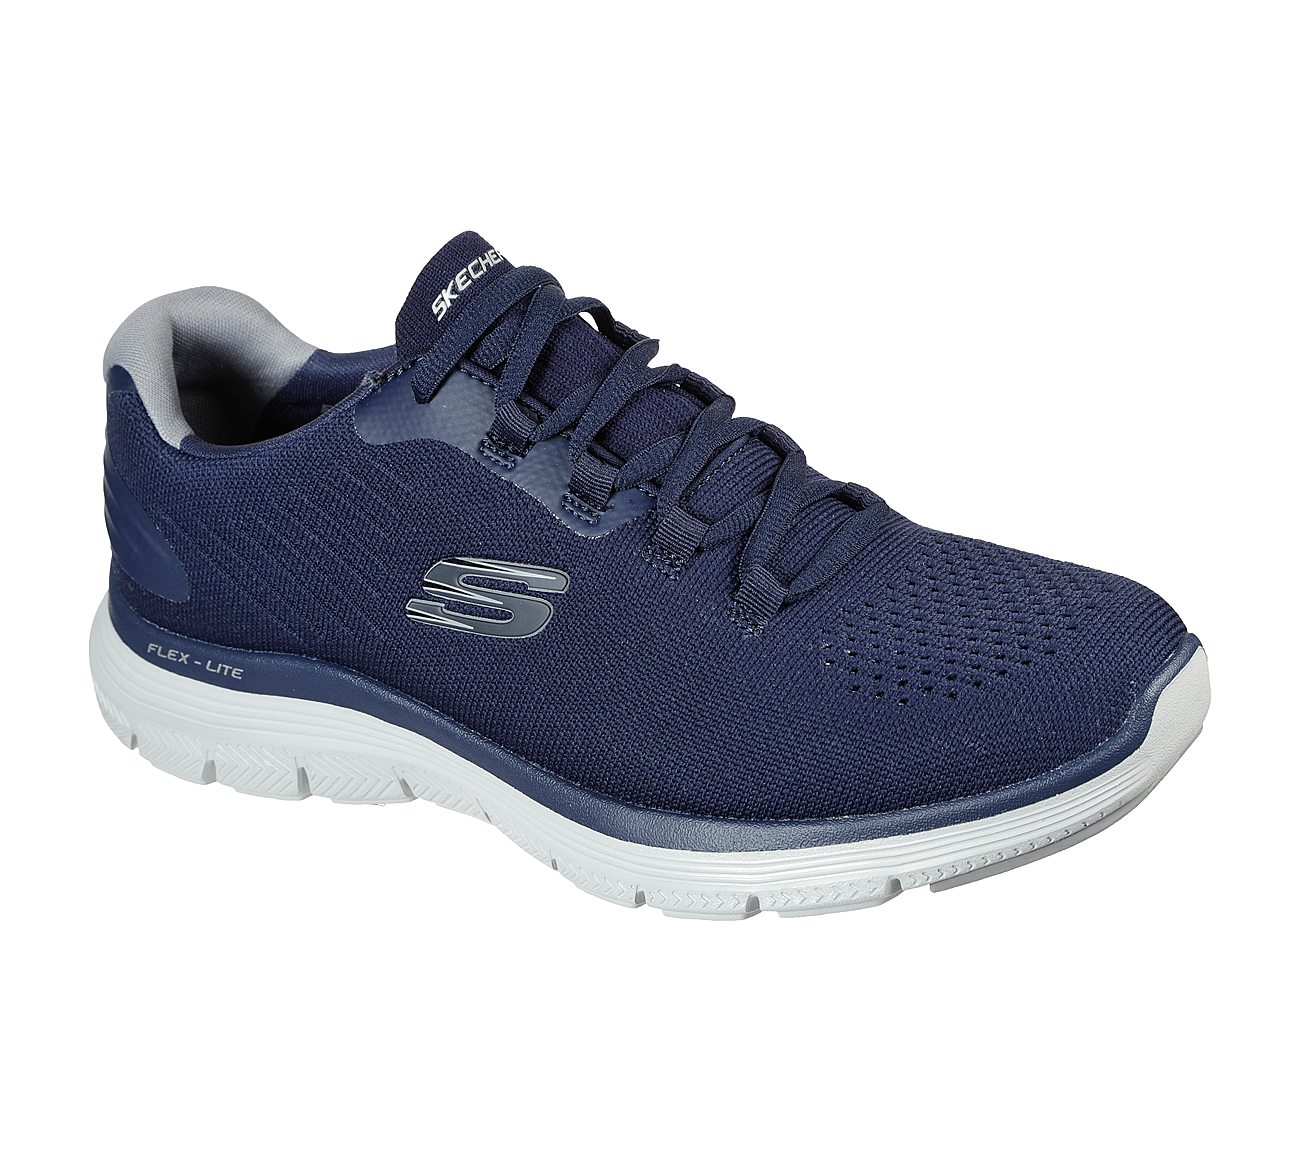 FLEX ADVANTAGE 4.0 - OVERTAKE, NAVY/CHARCOAL Footwear Lateral View